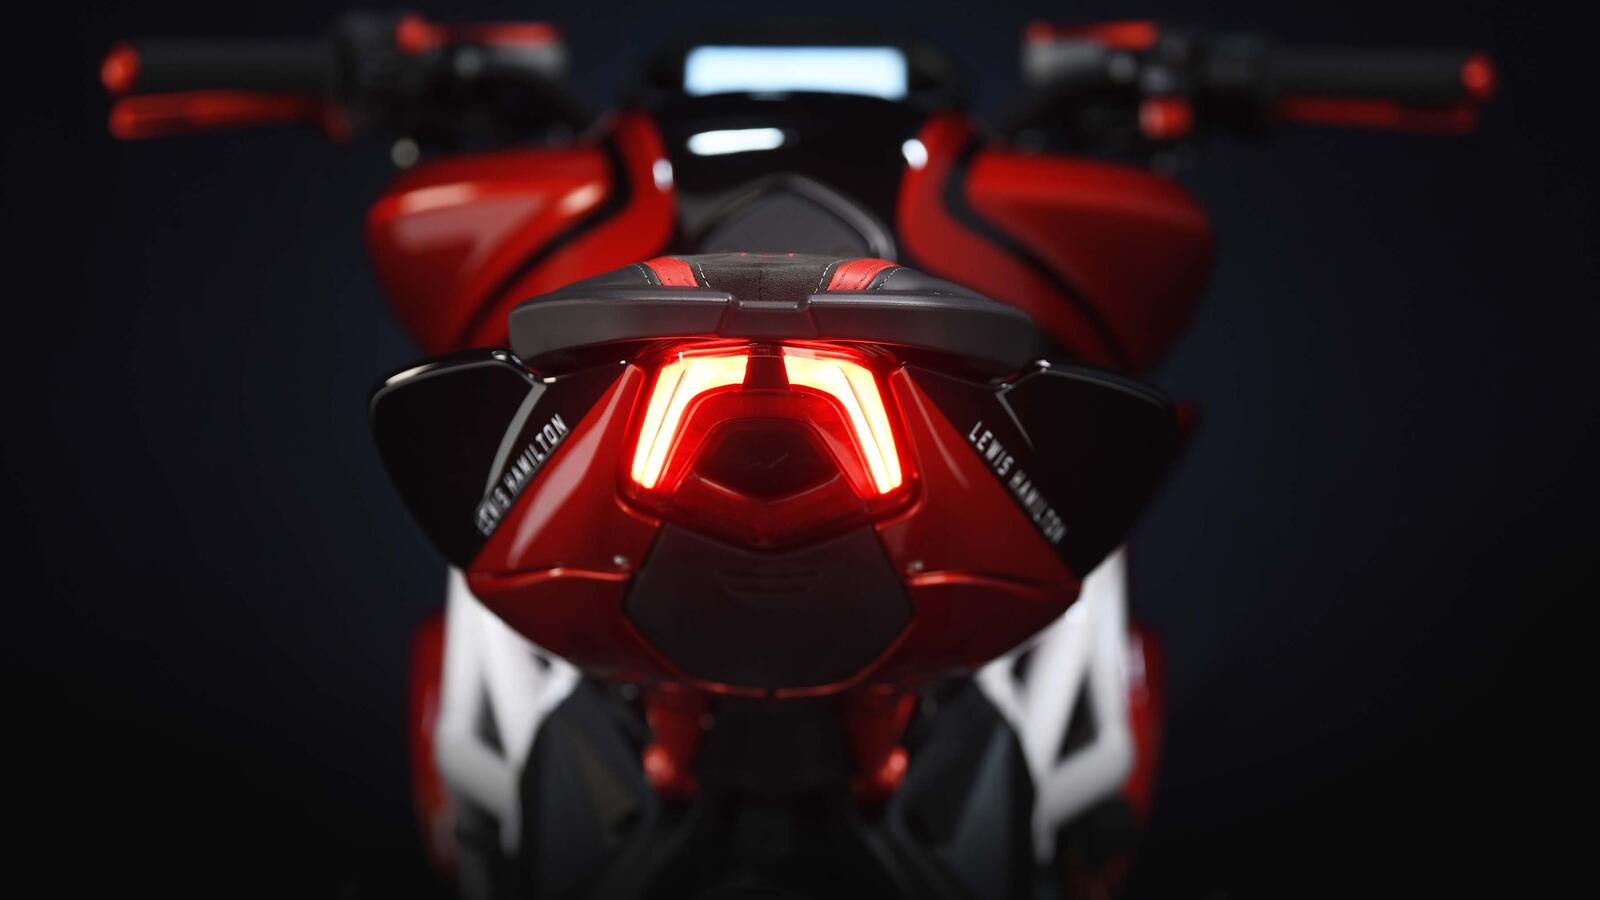 Wallpapers MV Agusta Brutale 800 red motorcycle on the desktop